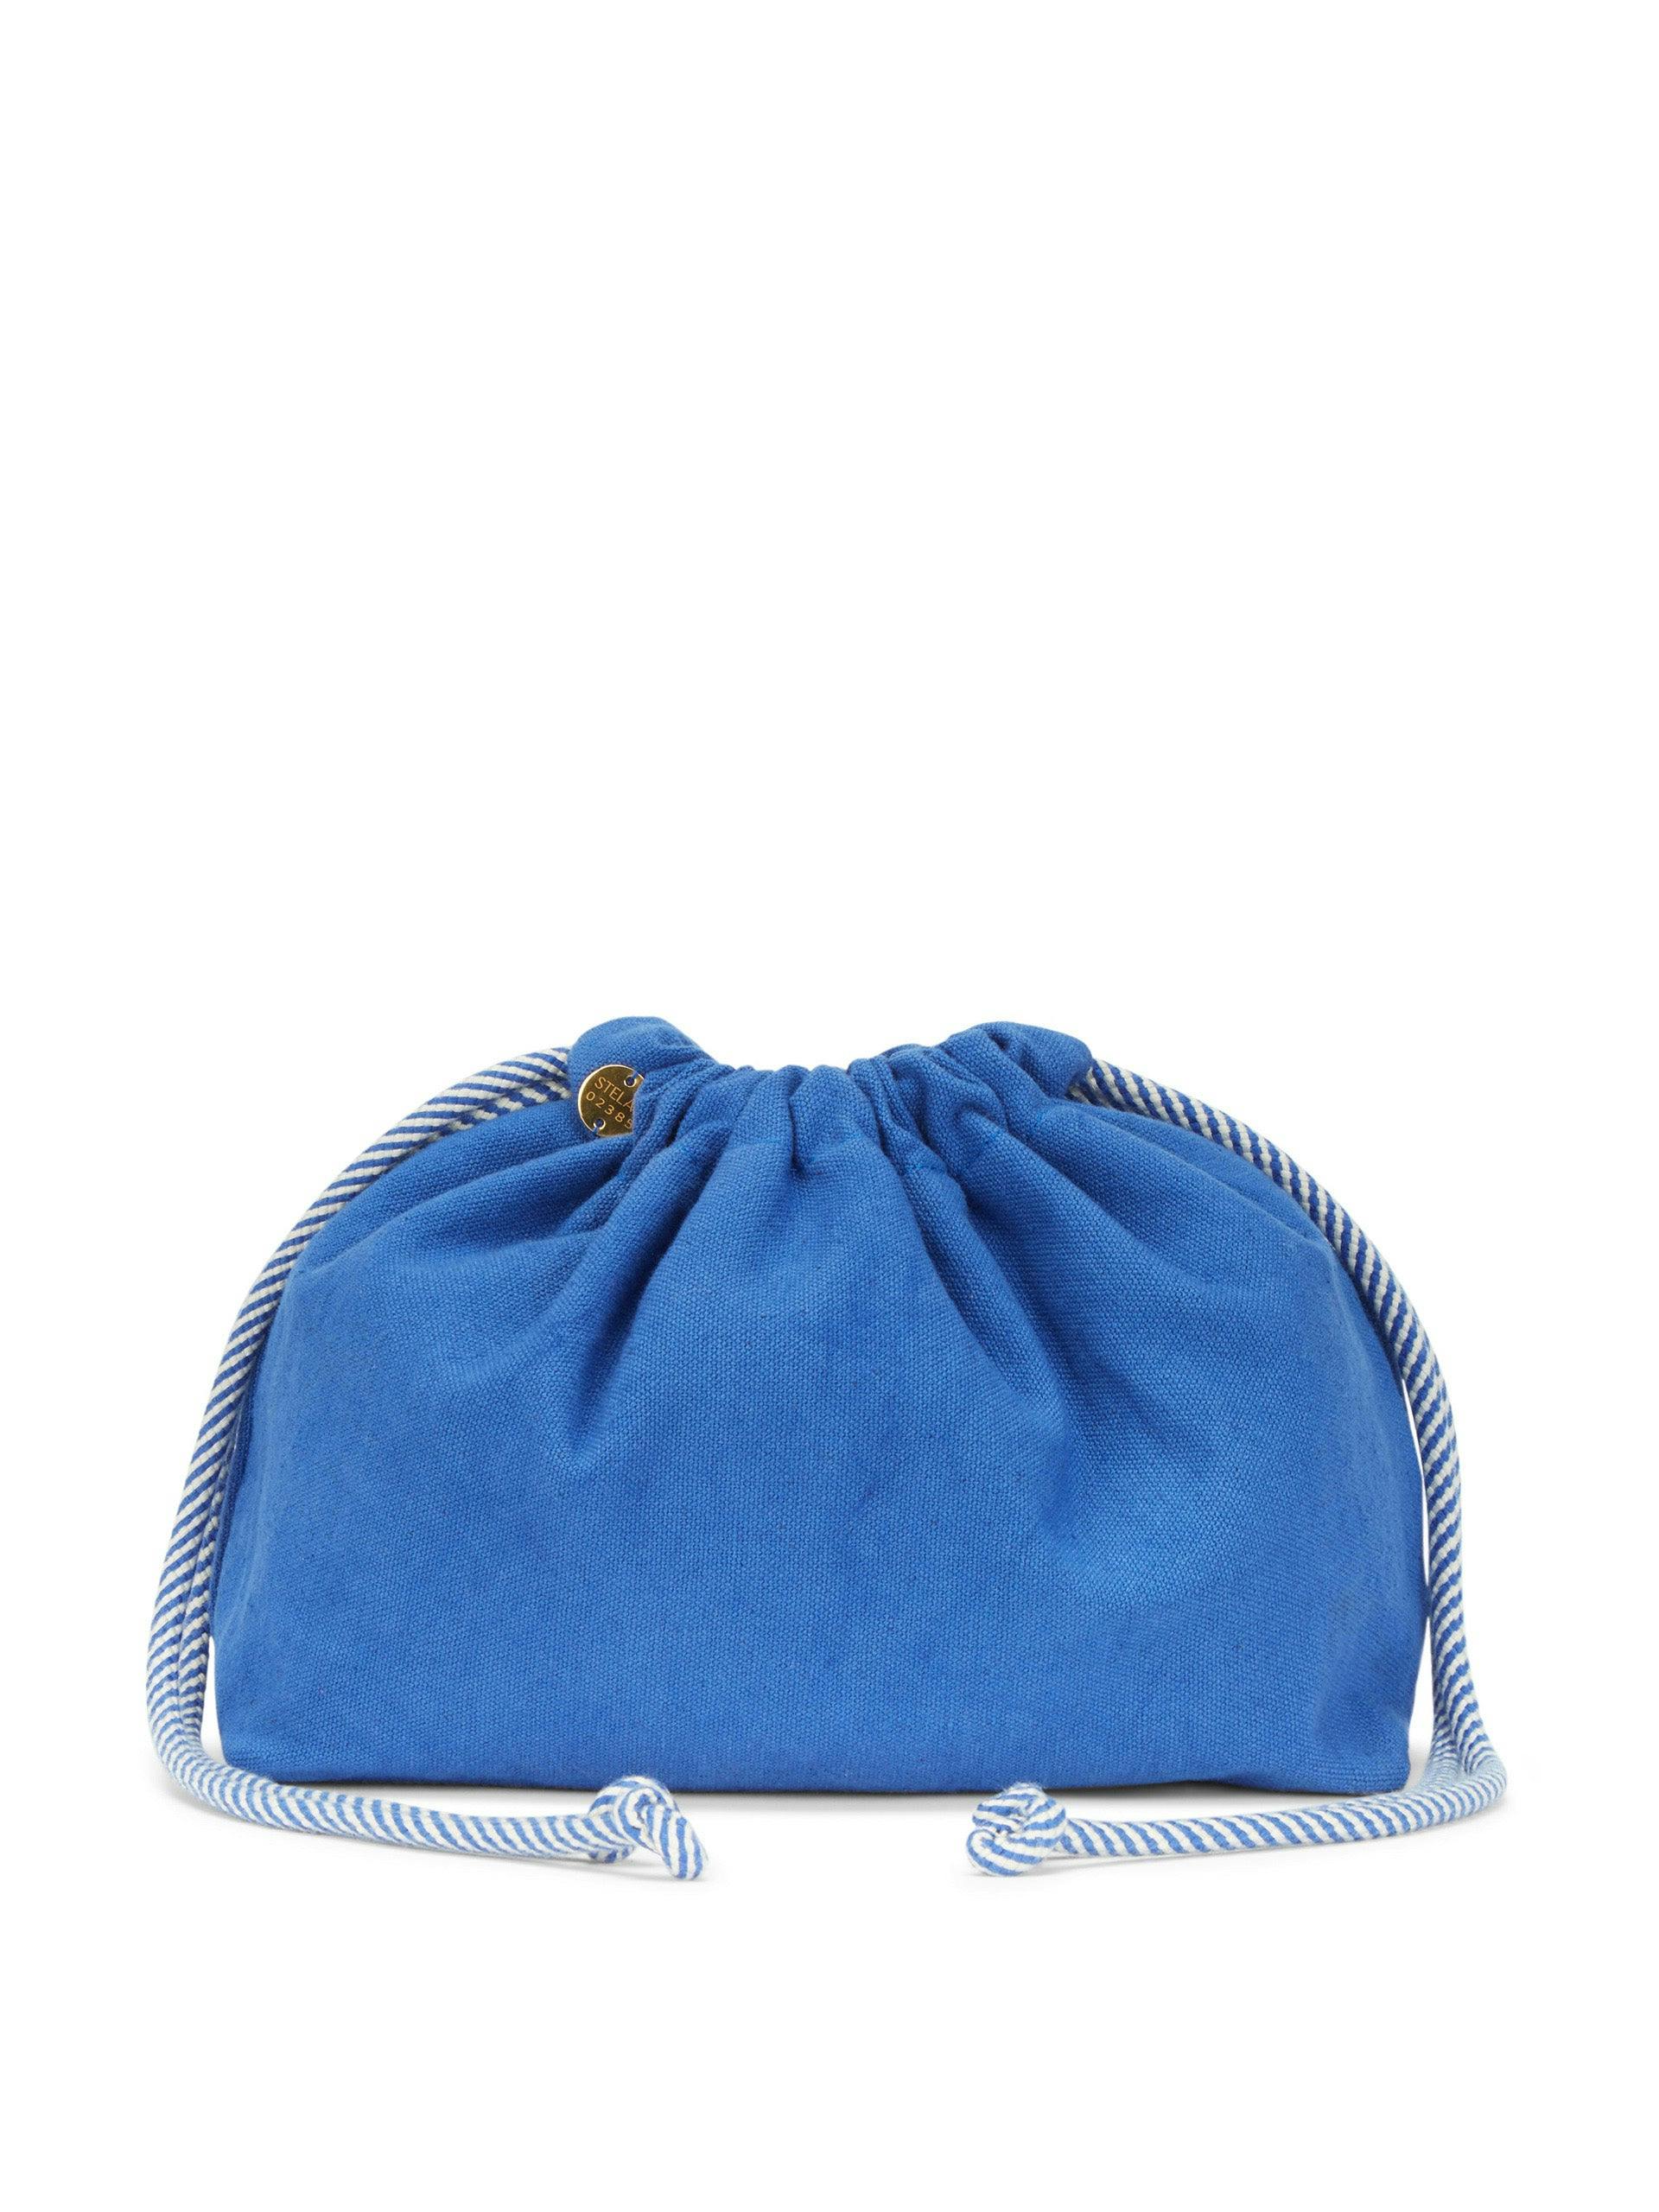 Anisa small drawstring blue canvas pouch bag